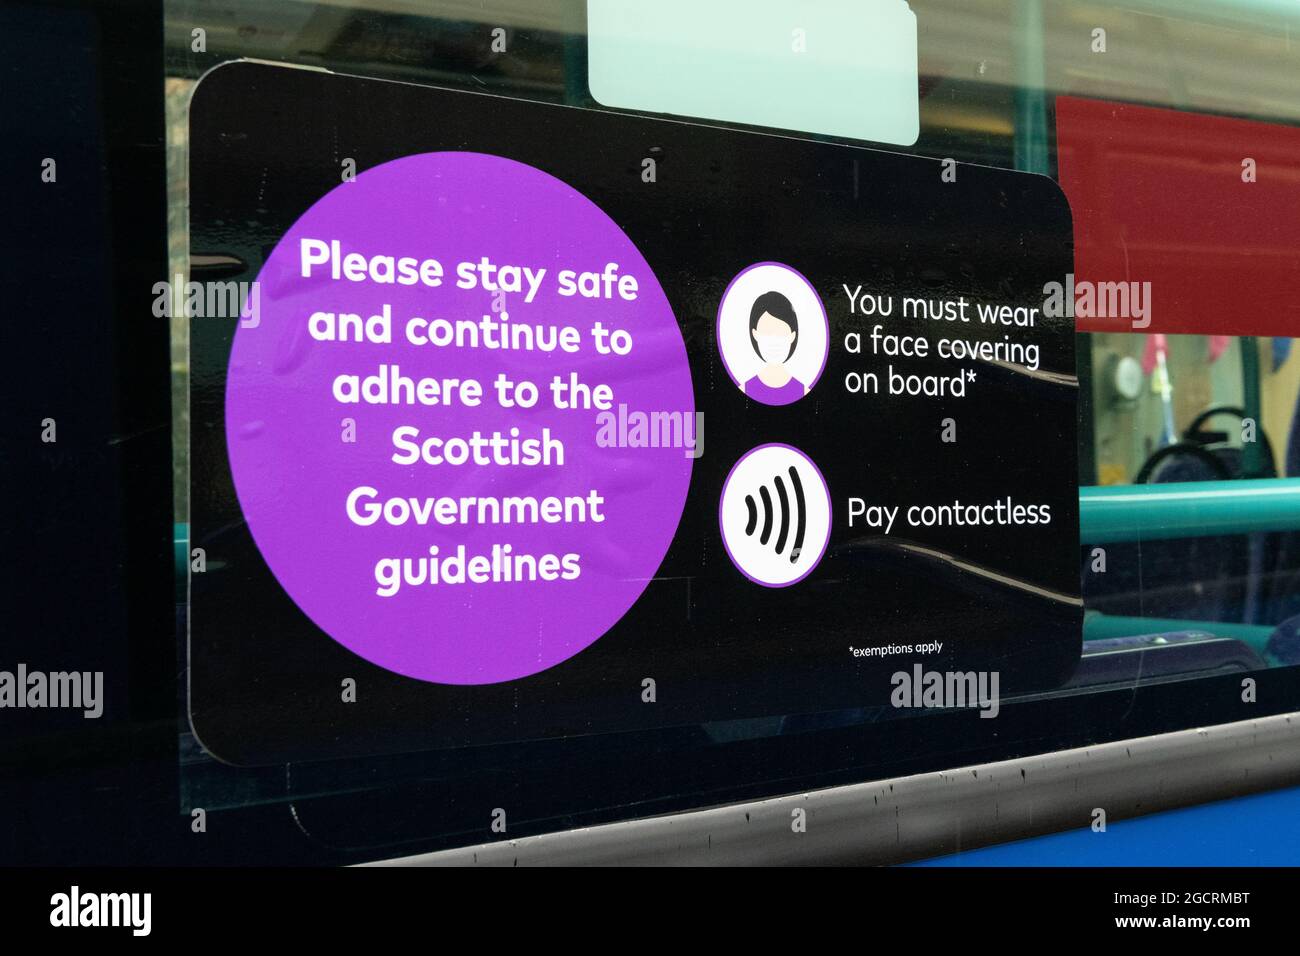 Face mask face covering sign on First Bus bus window saying 'you must wear a face covering on board' and 'pay contactless' - Scotland, UK Stock Photo